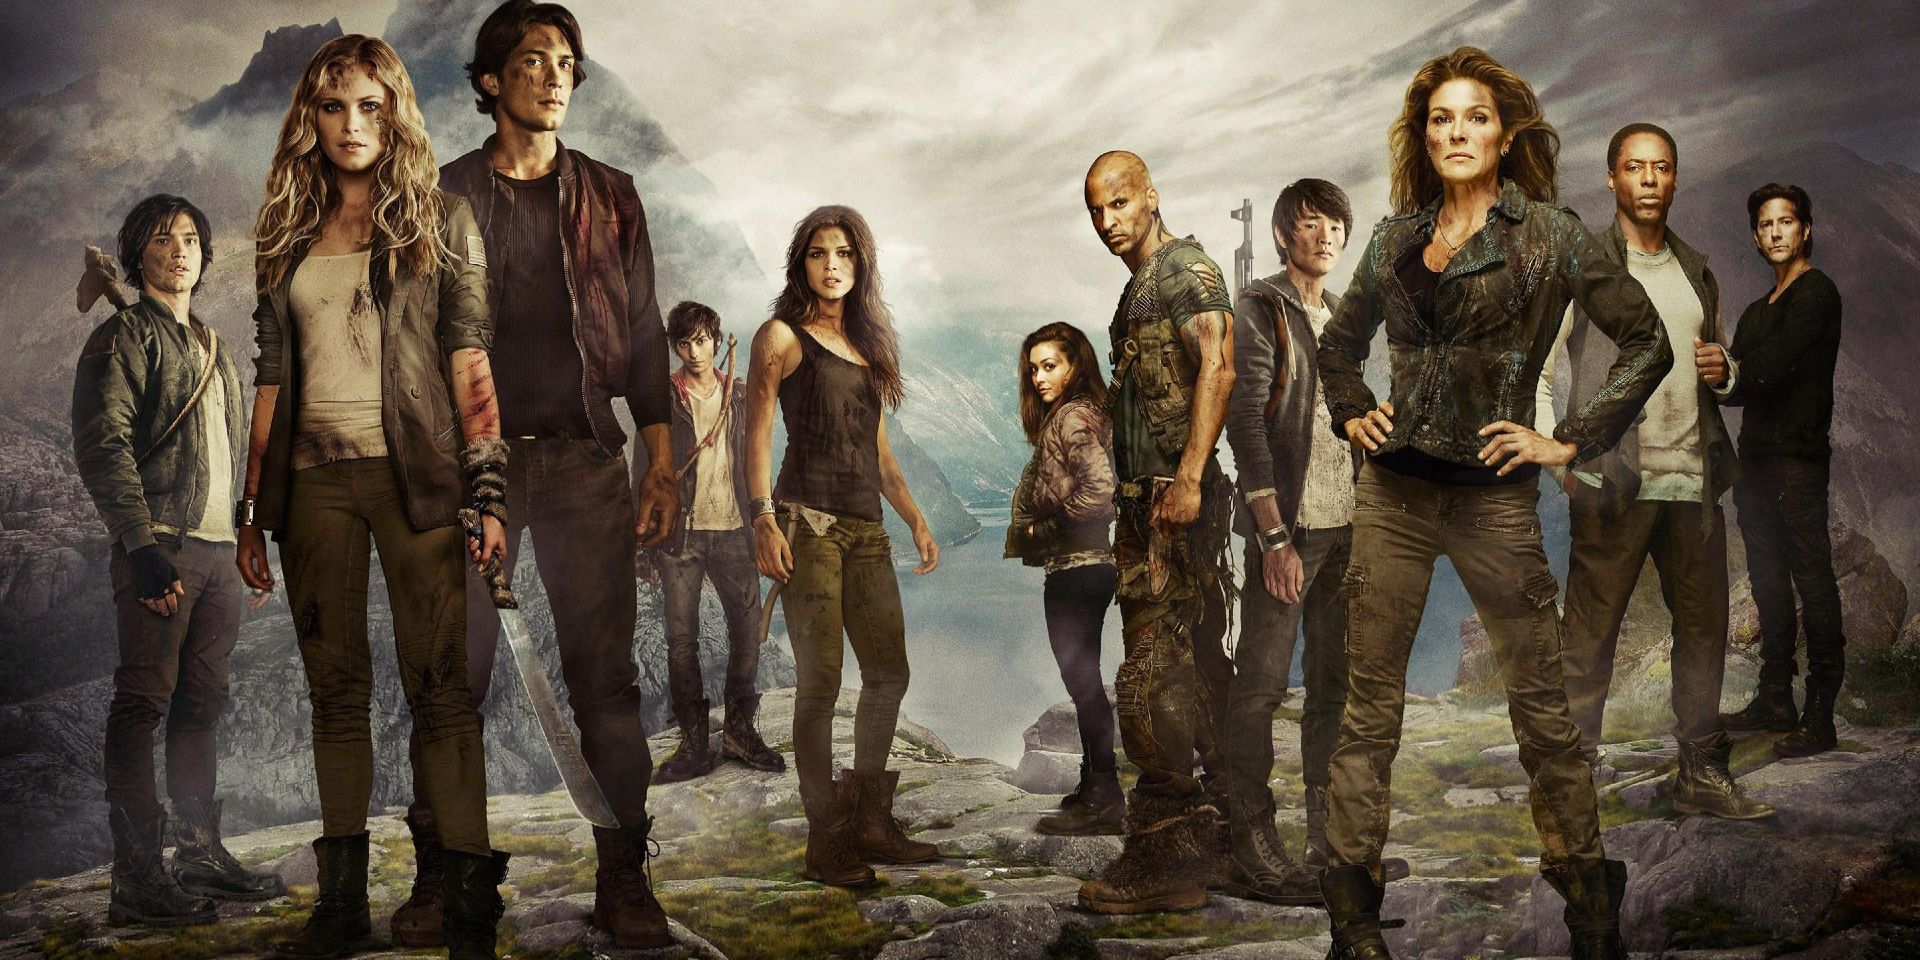 The cast of the CW series The 100.